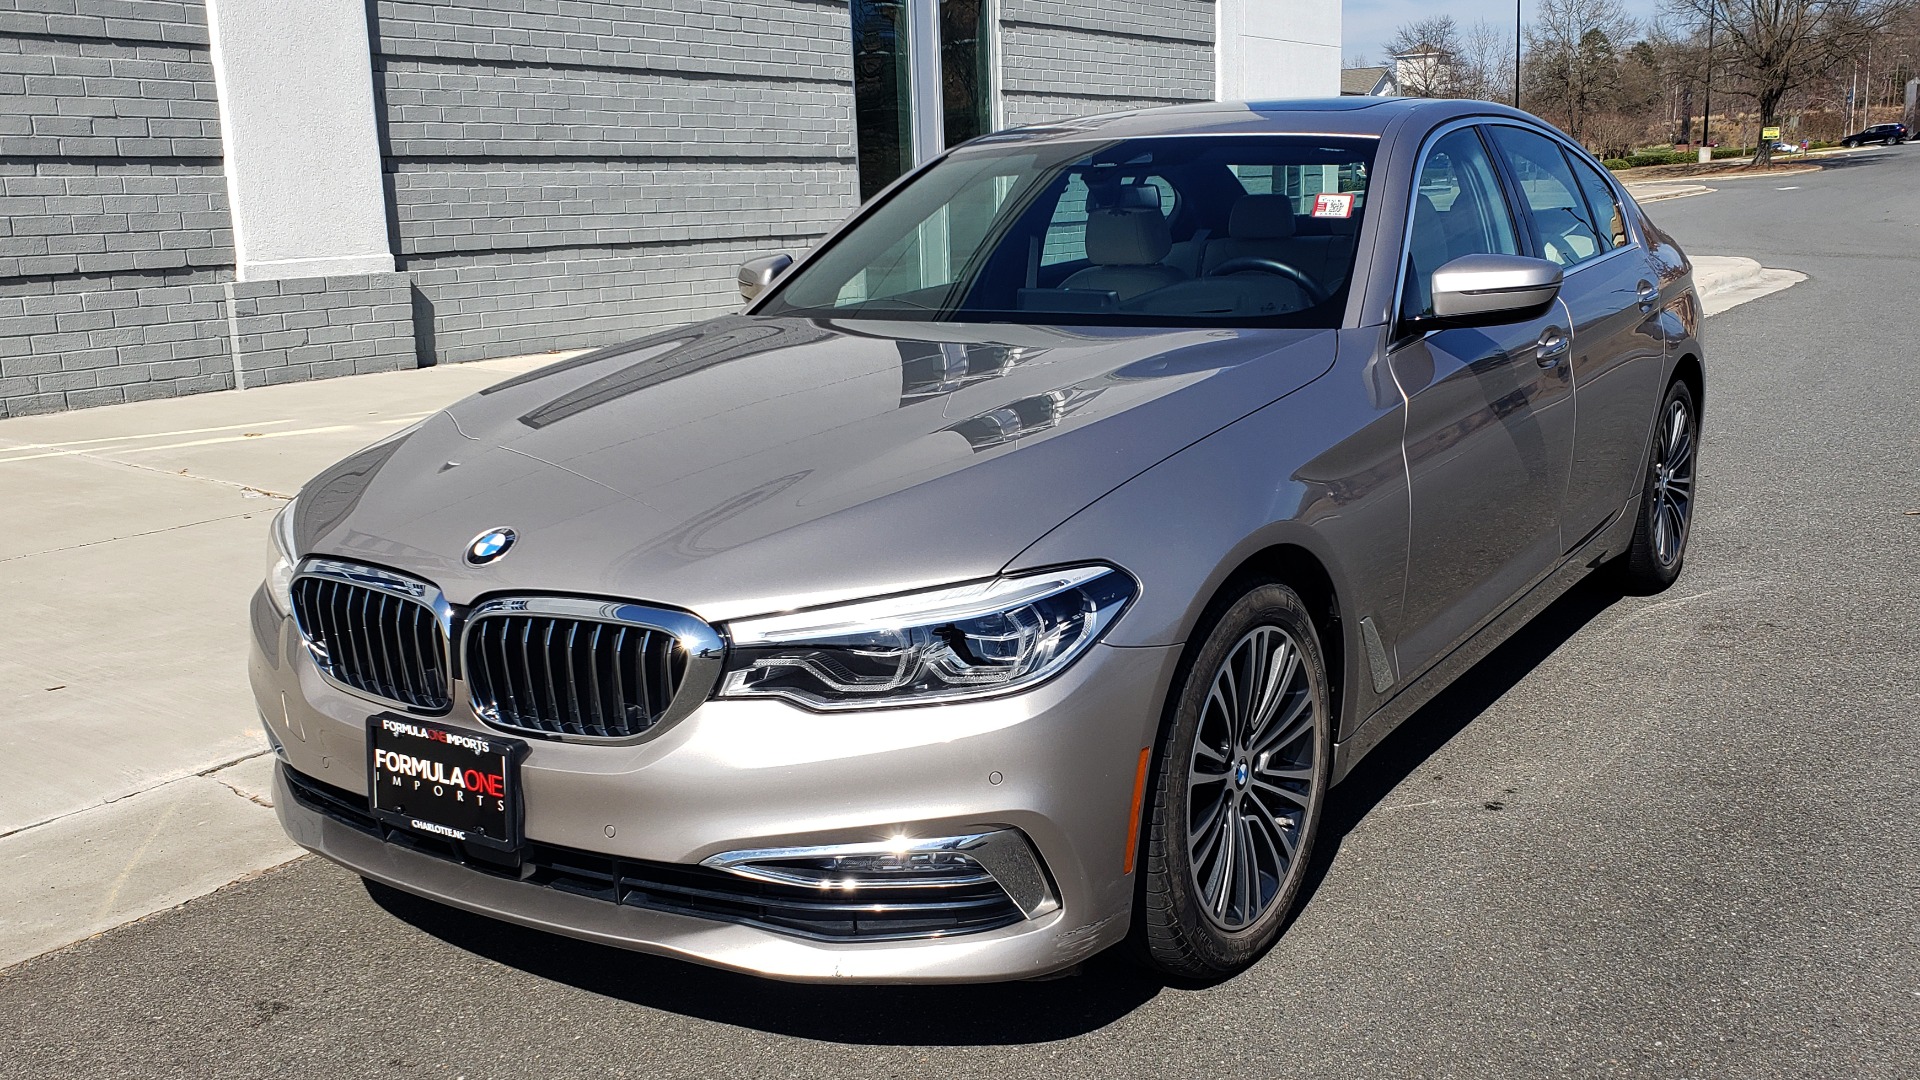 Used 2018 BMW 5 SERIES 540IXDRIVE PREMIUM / DRVR ASST PLUS / LUX PKG / APPLE CARPLAY for sale Sold at Formula Imports in Charlotte NC 28227 1